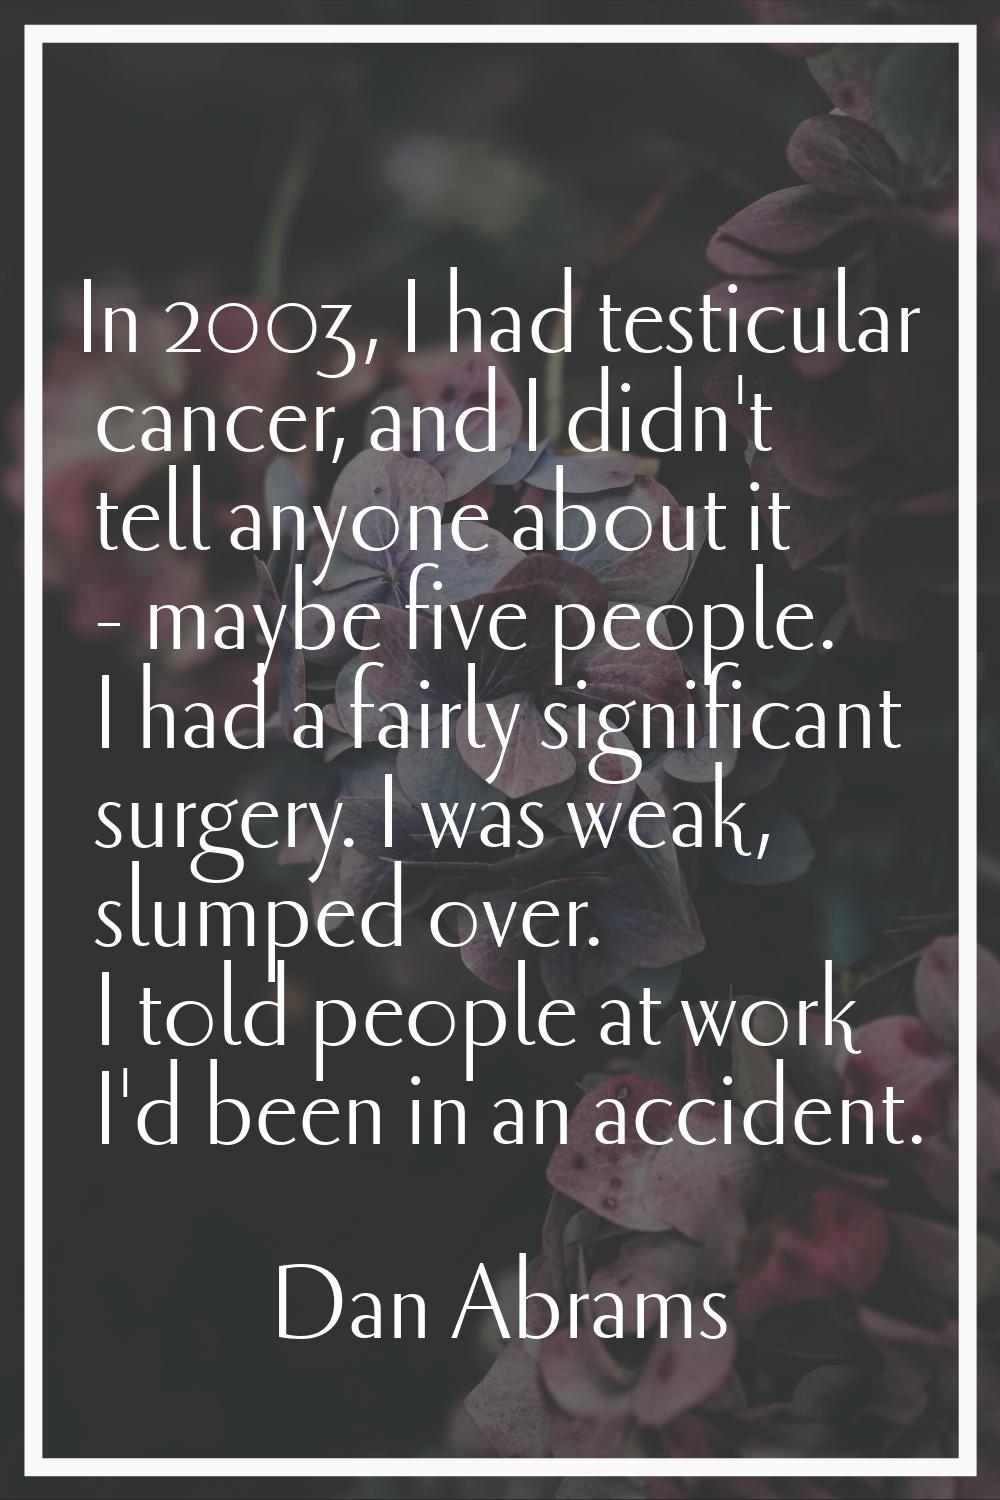 In 2003, I had testicular cancer, and I didn't tell anyone about it - maybe five people. I had a fa